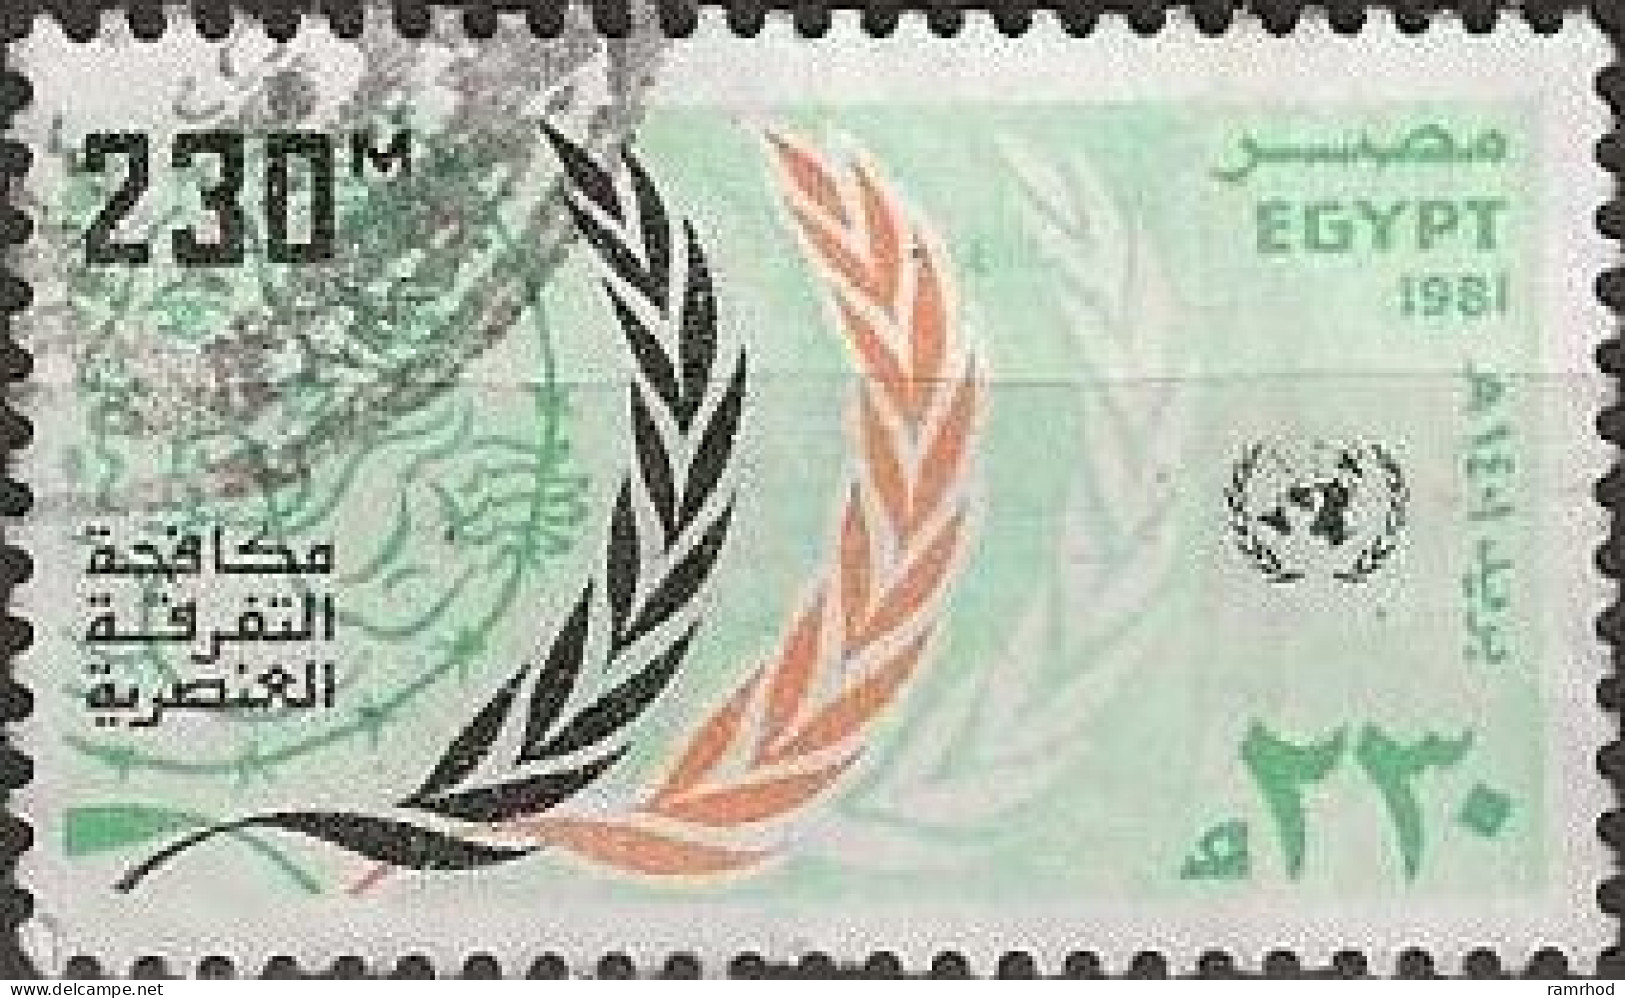 EGYPT 1981 United Nations Day - 230m. Olive Branches (Racial Discrimination Day) FU - Oblitérés